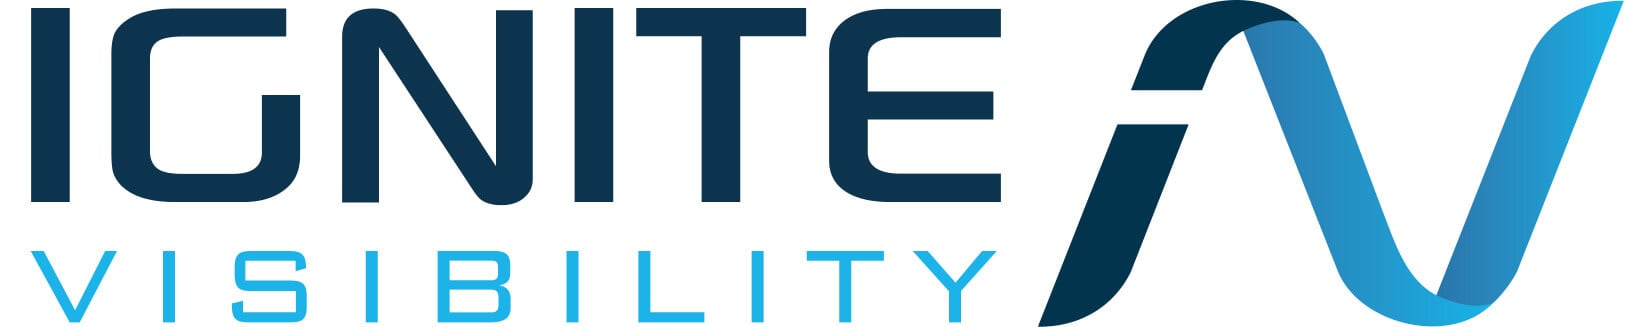 Top Medical SEO Firm Logo: Ignite Visibility